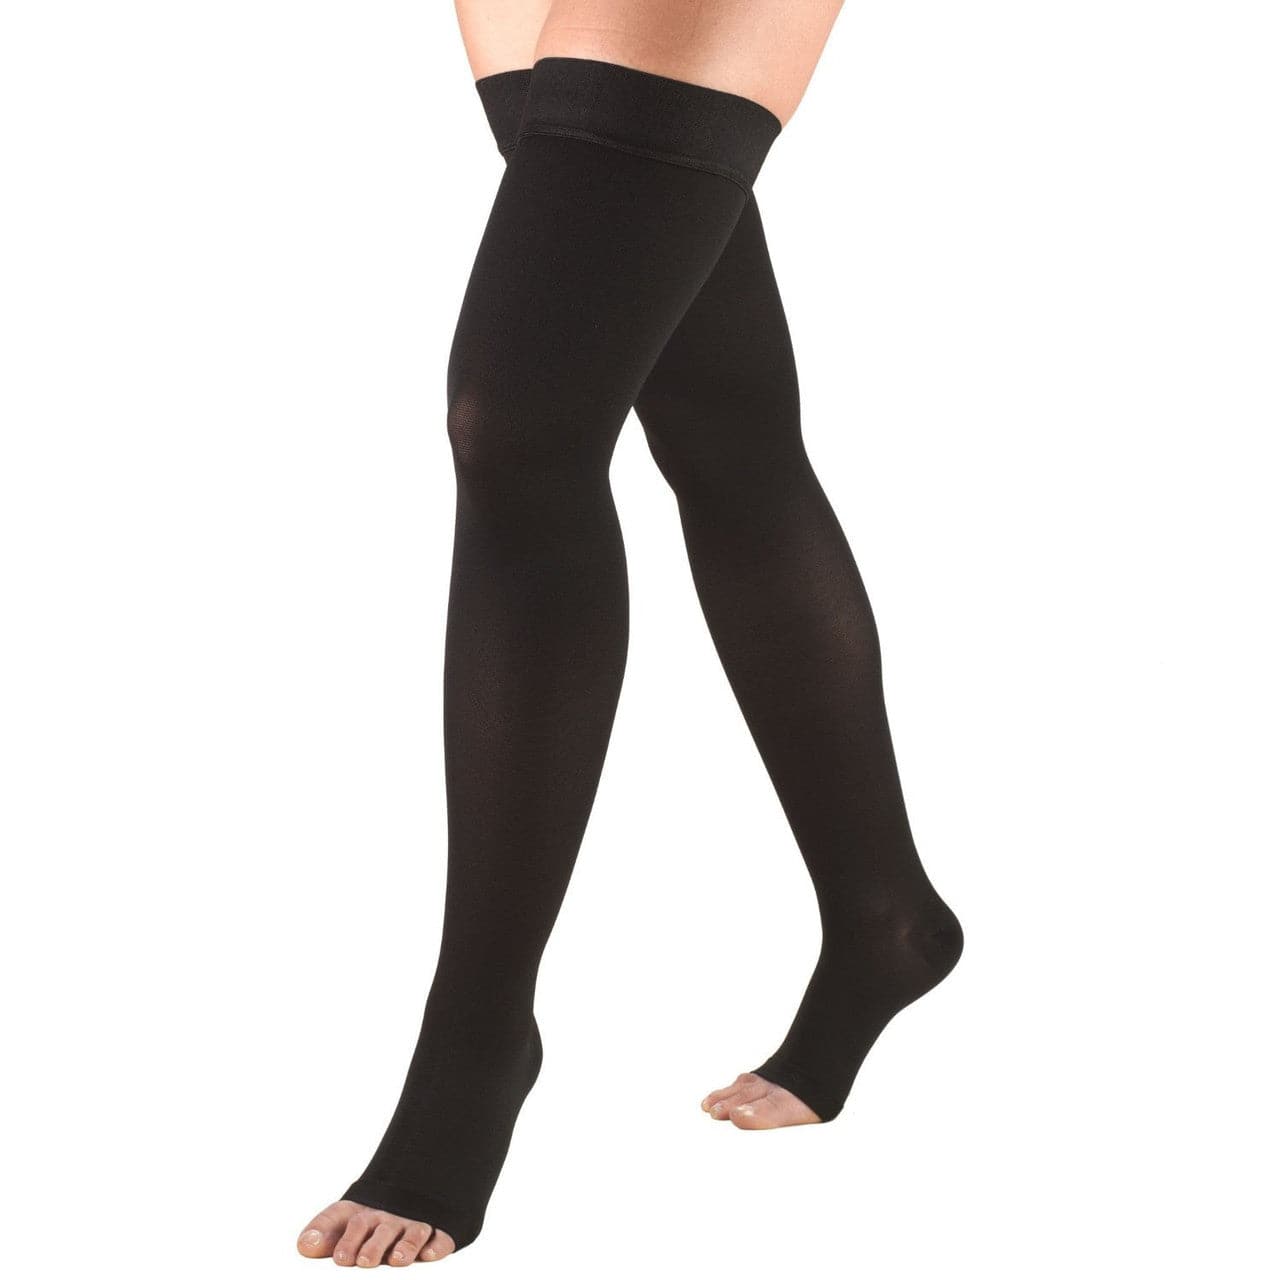 Extra Wide Womens Open Toe Compression Pantyhose 20-30 mmHg